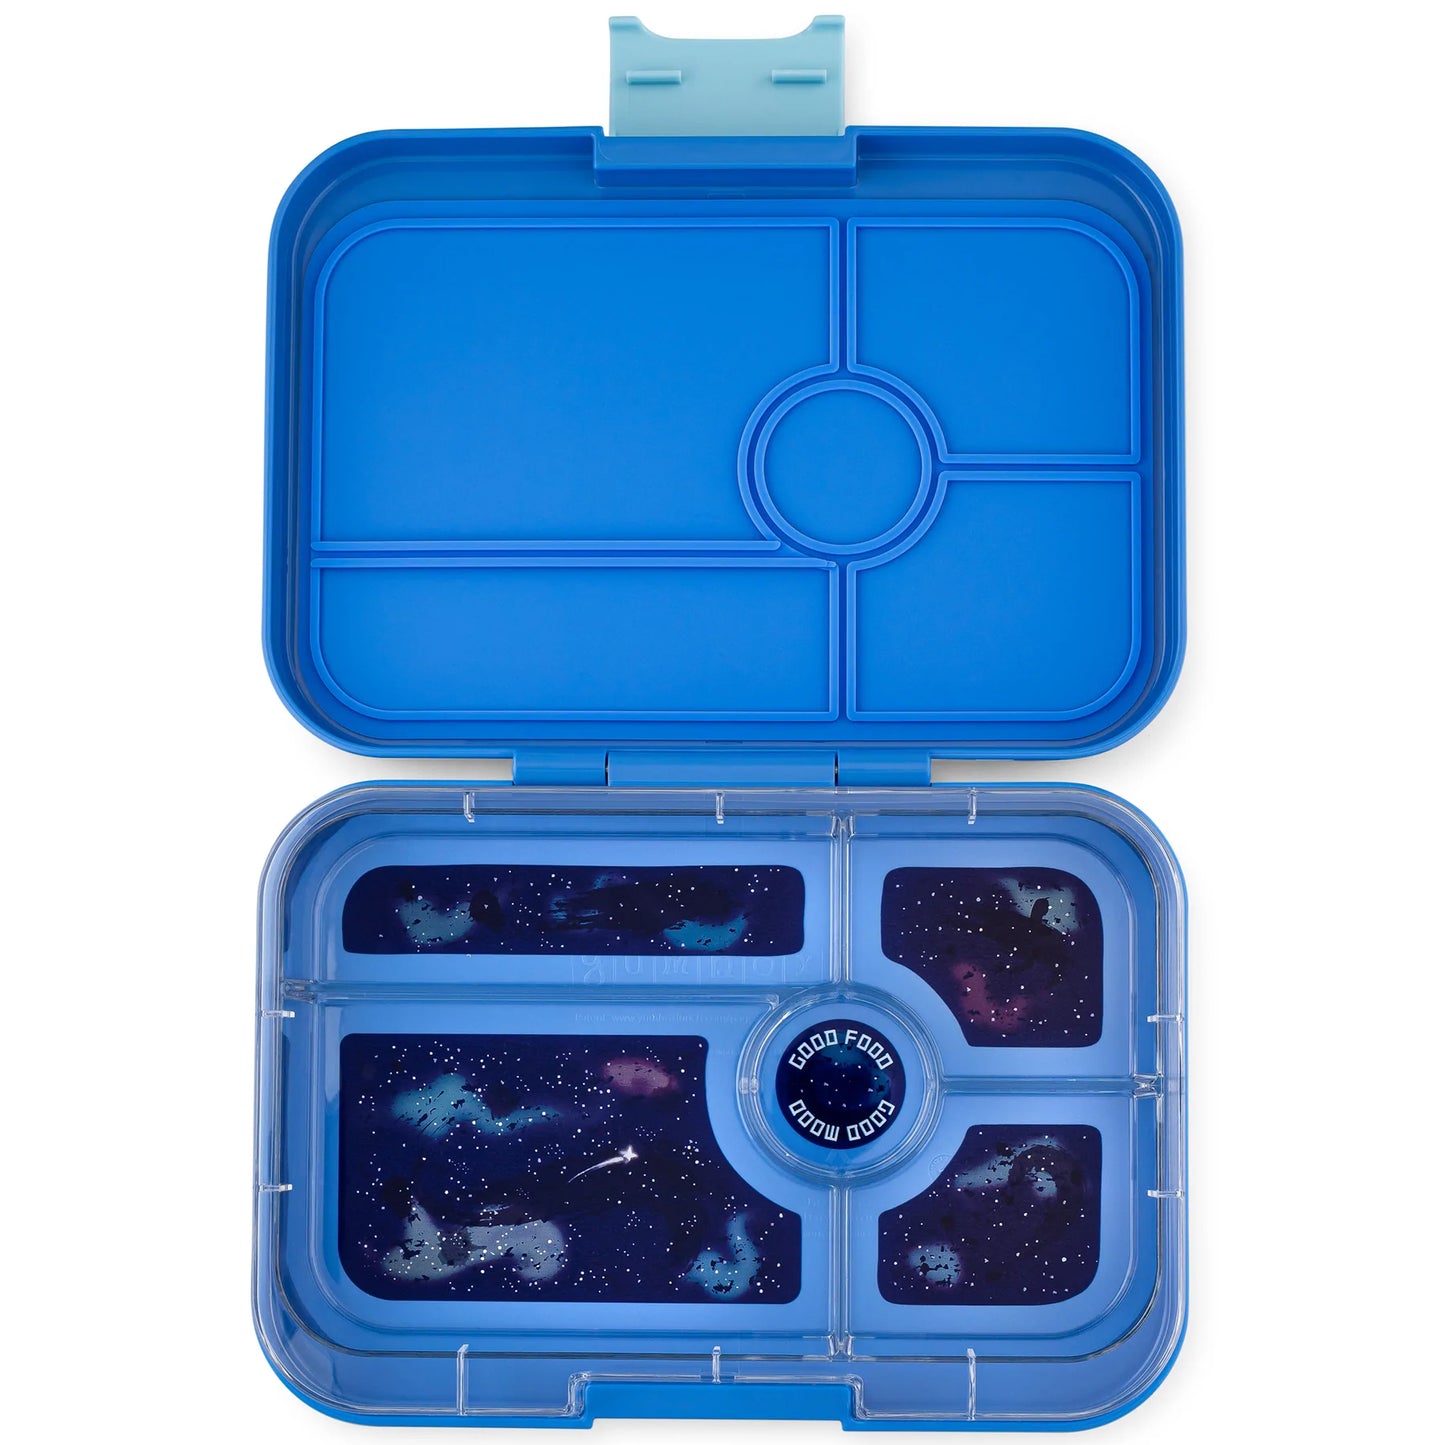 Yumbox Tapas 5 Compartments (Large)